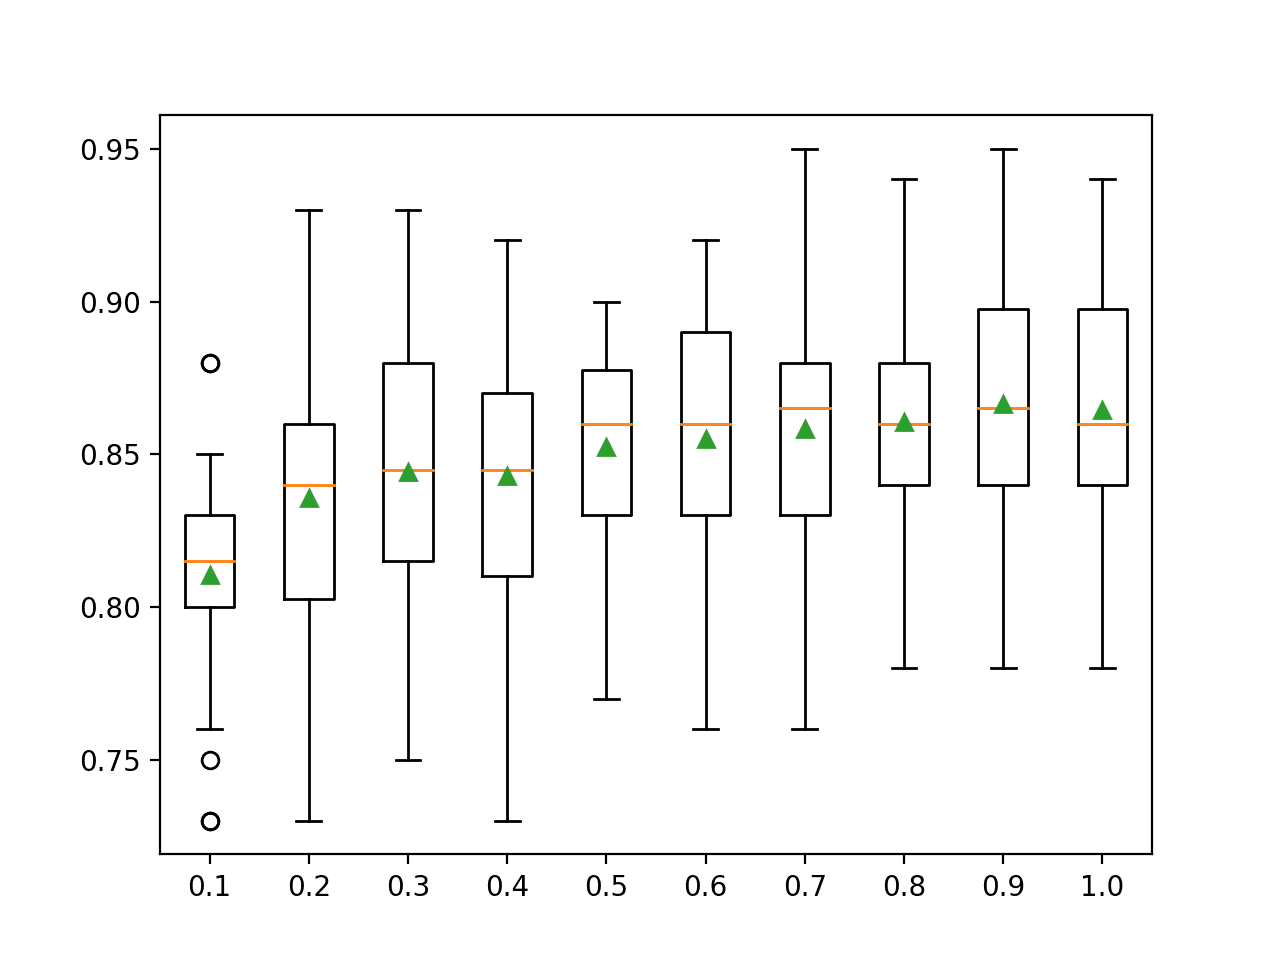 Box Plot of Bagging Sample Size vs. Classification Accuracy